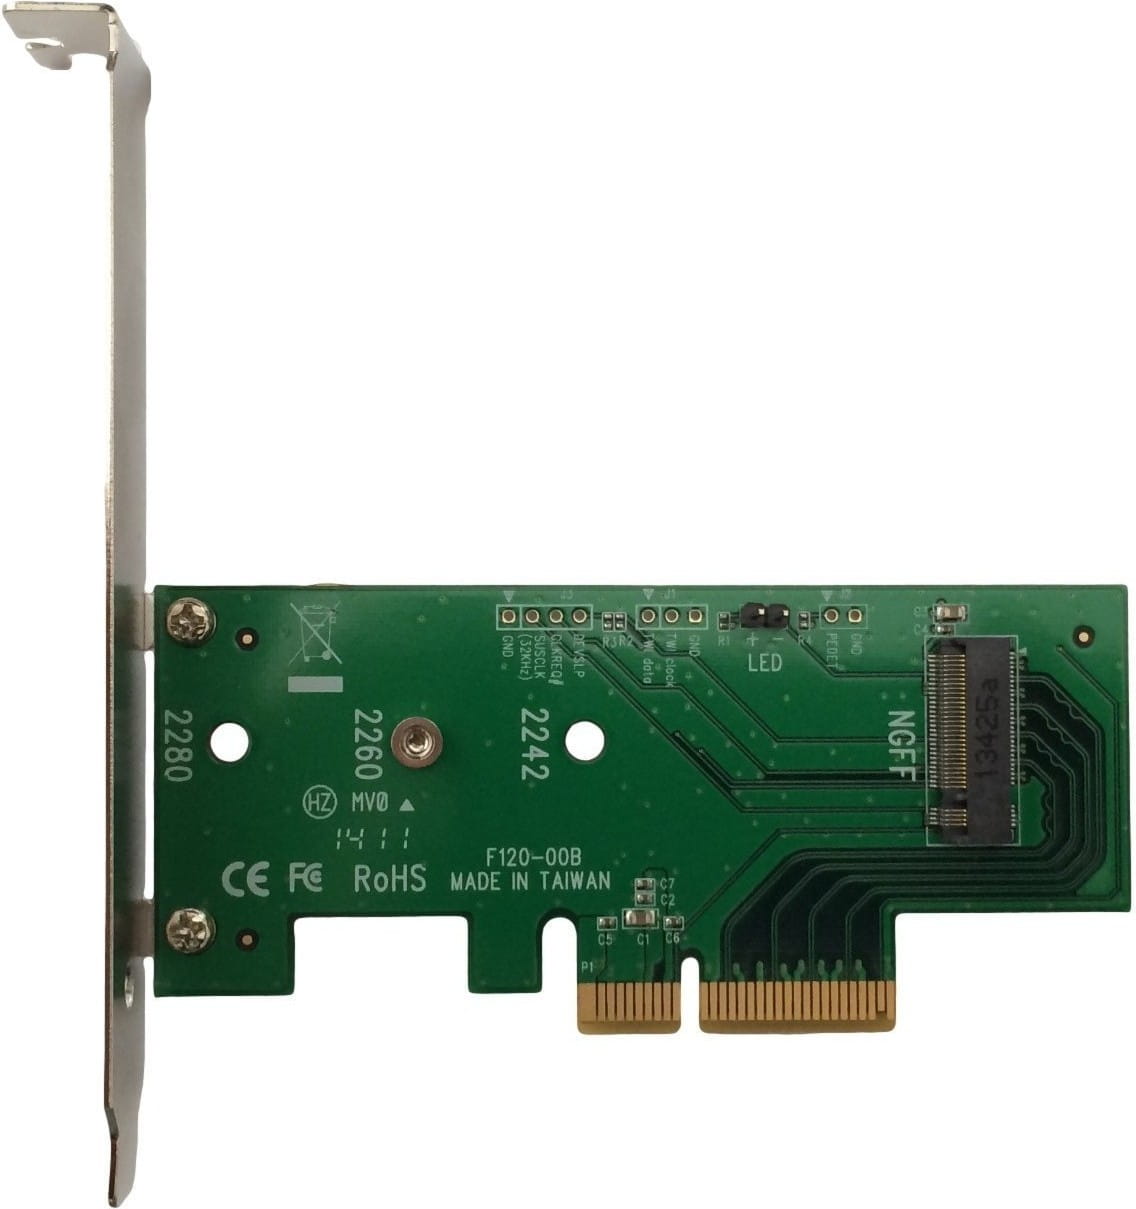 LyCOM DT-120 / PCIe 3.0 x4 Host Adapter for M.2 NVMe PCIe SSD 80 / 60 / 42